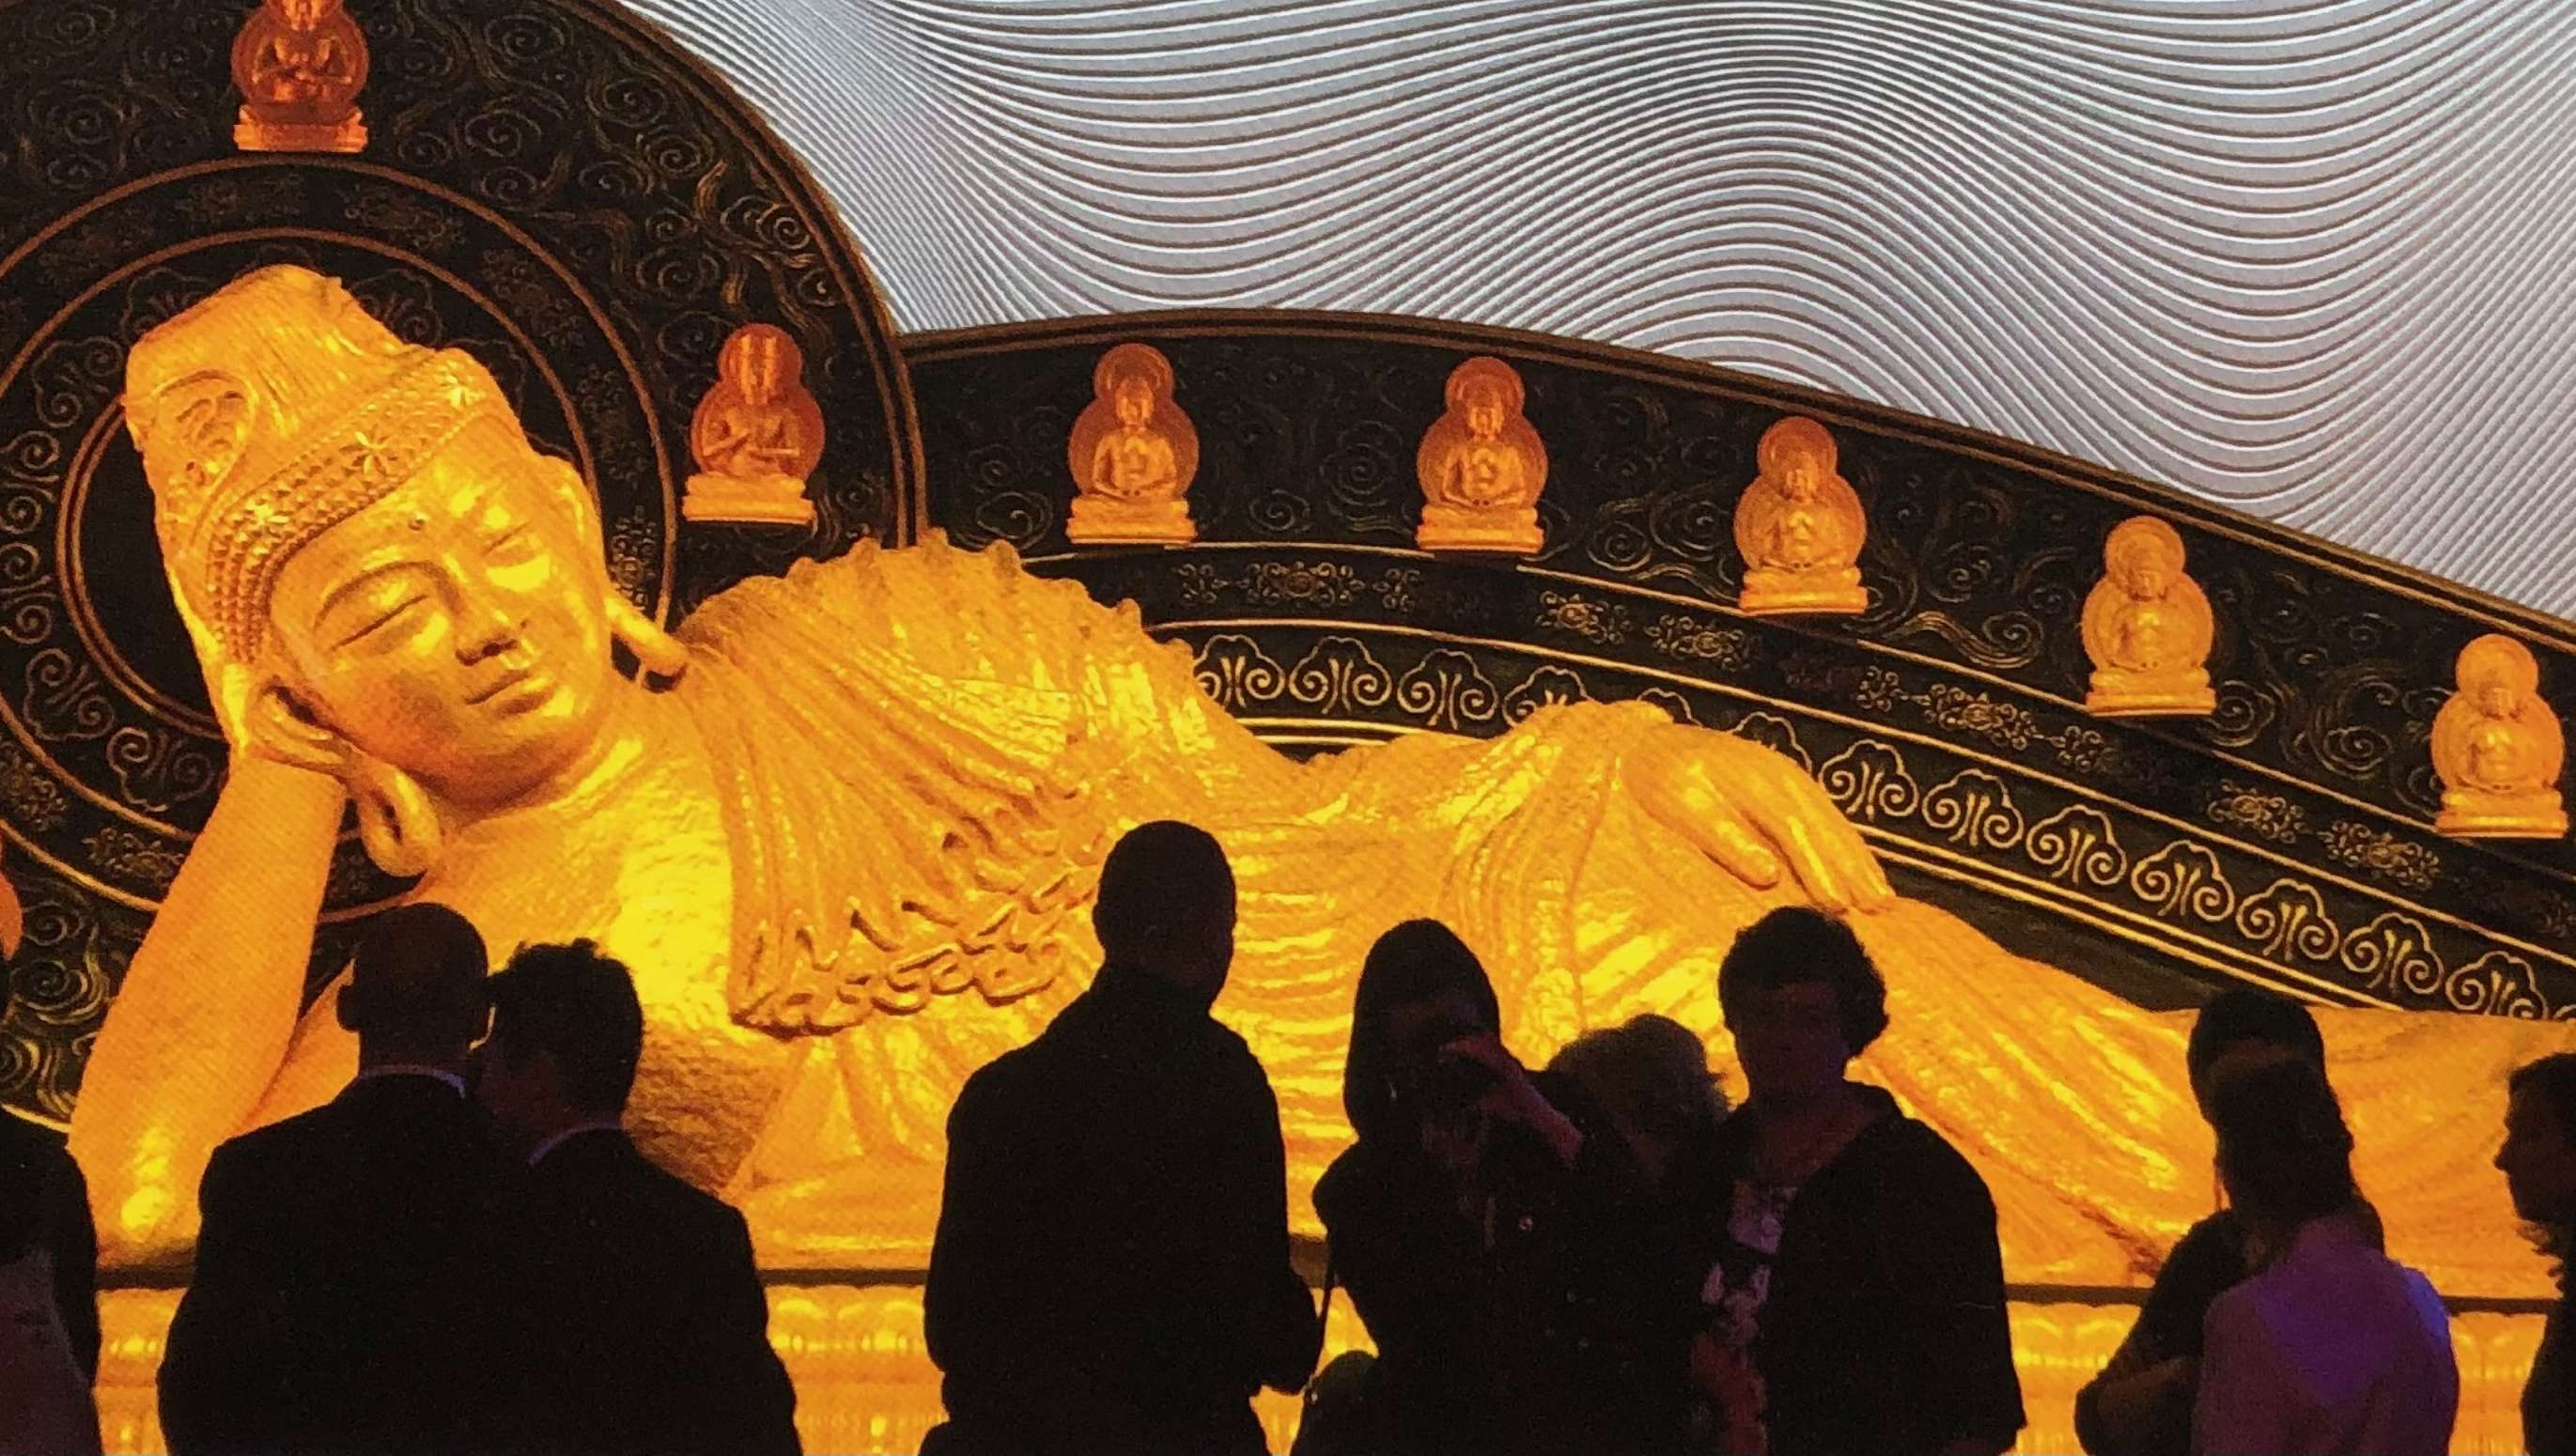 A photograph of viewers silhouetted against a very large Nirvana Buddha image, in which the Buddha, reclining on his right side, resting his head on his right hand, appears to be looking at them.